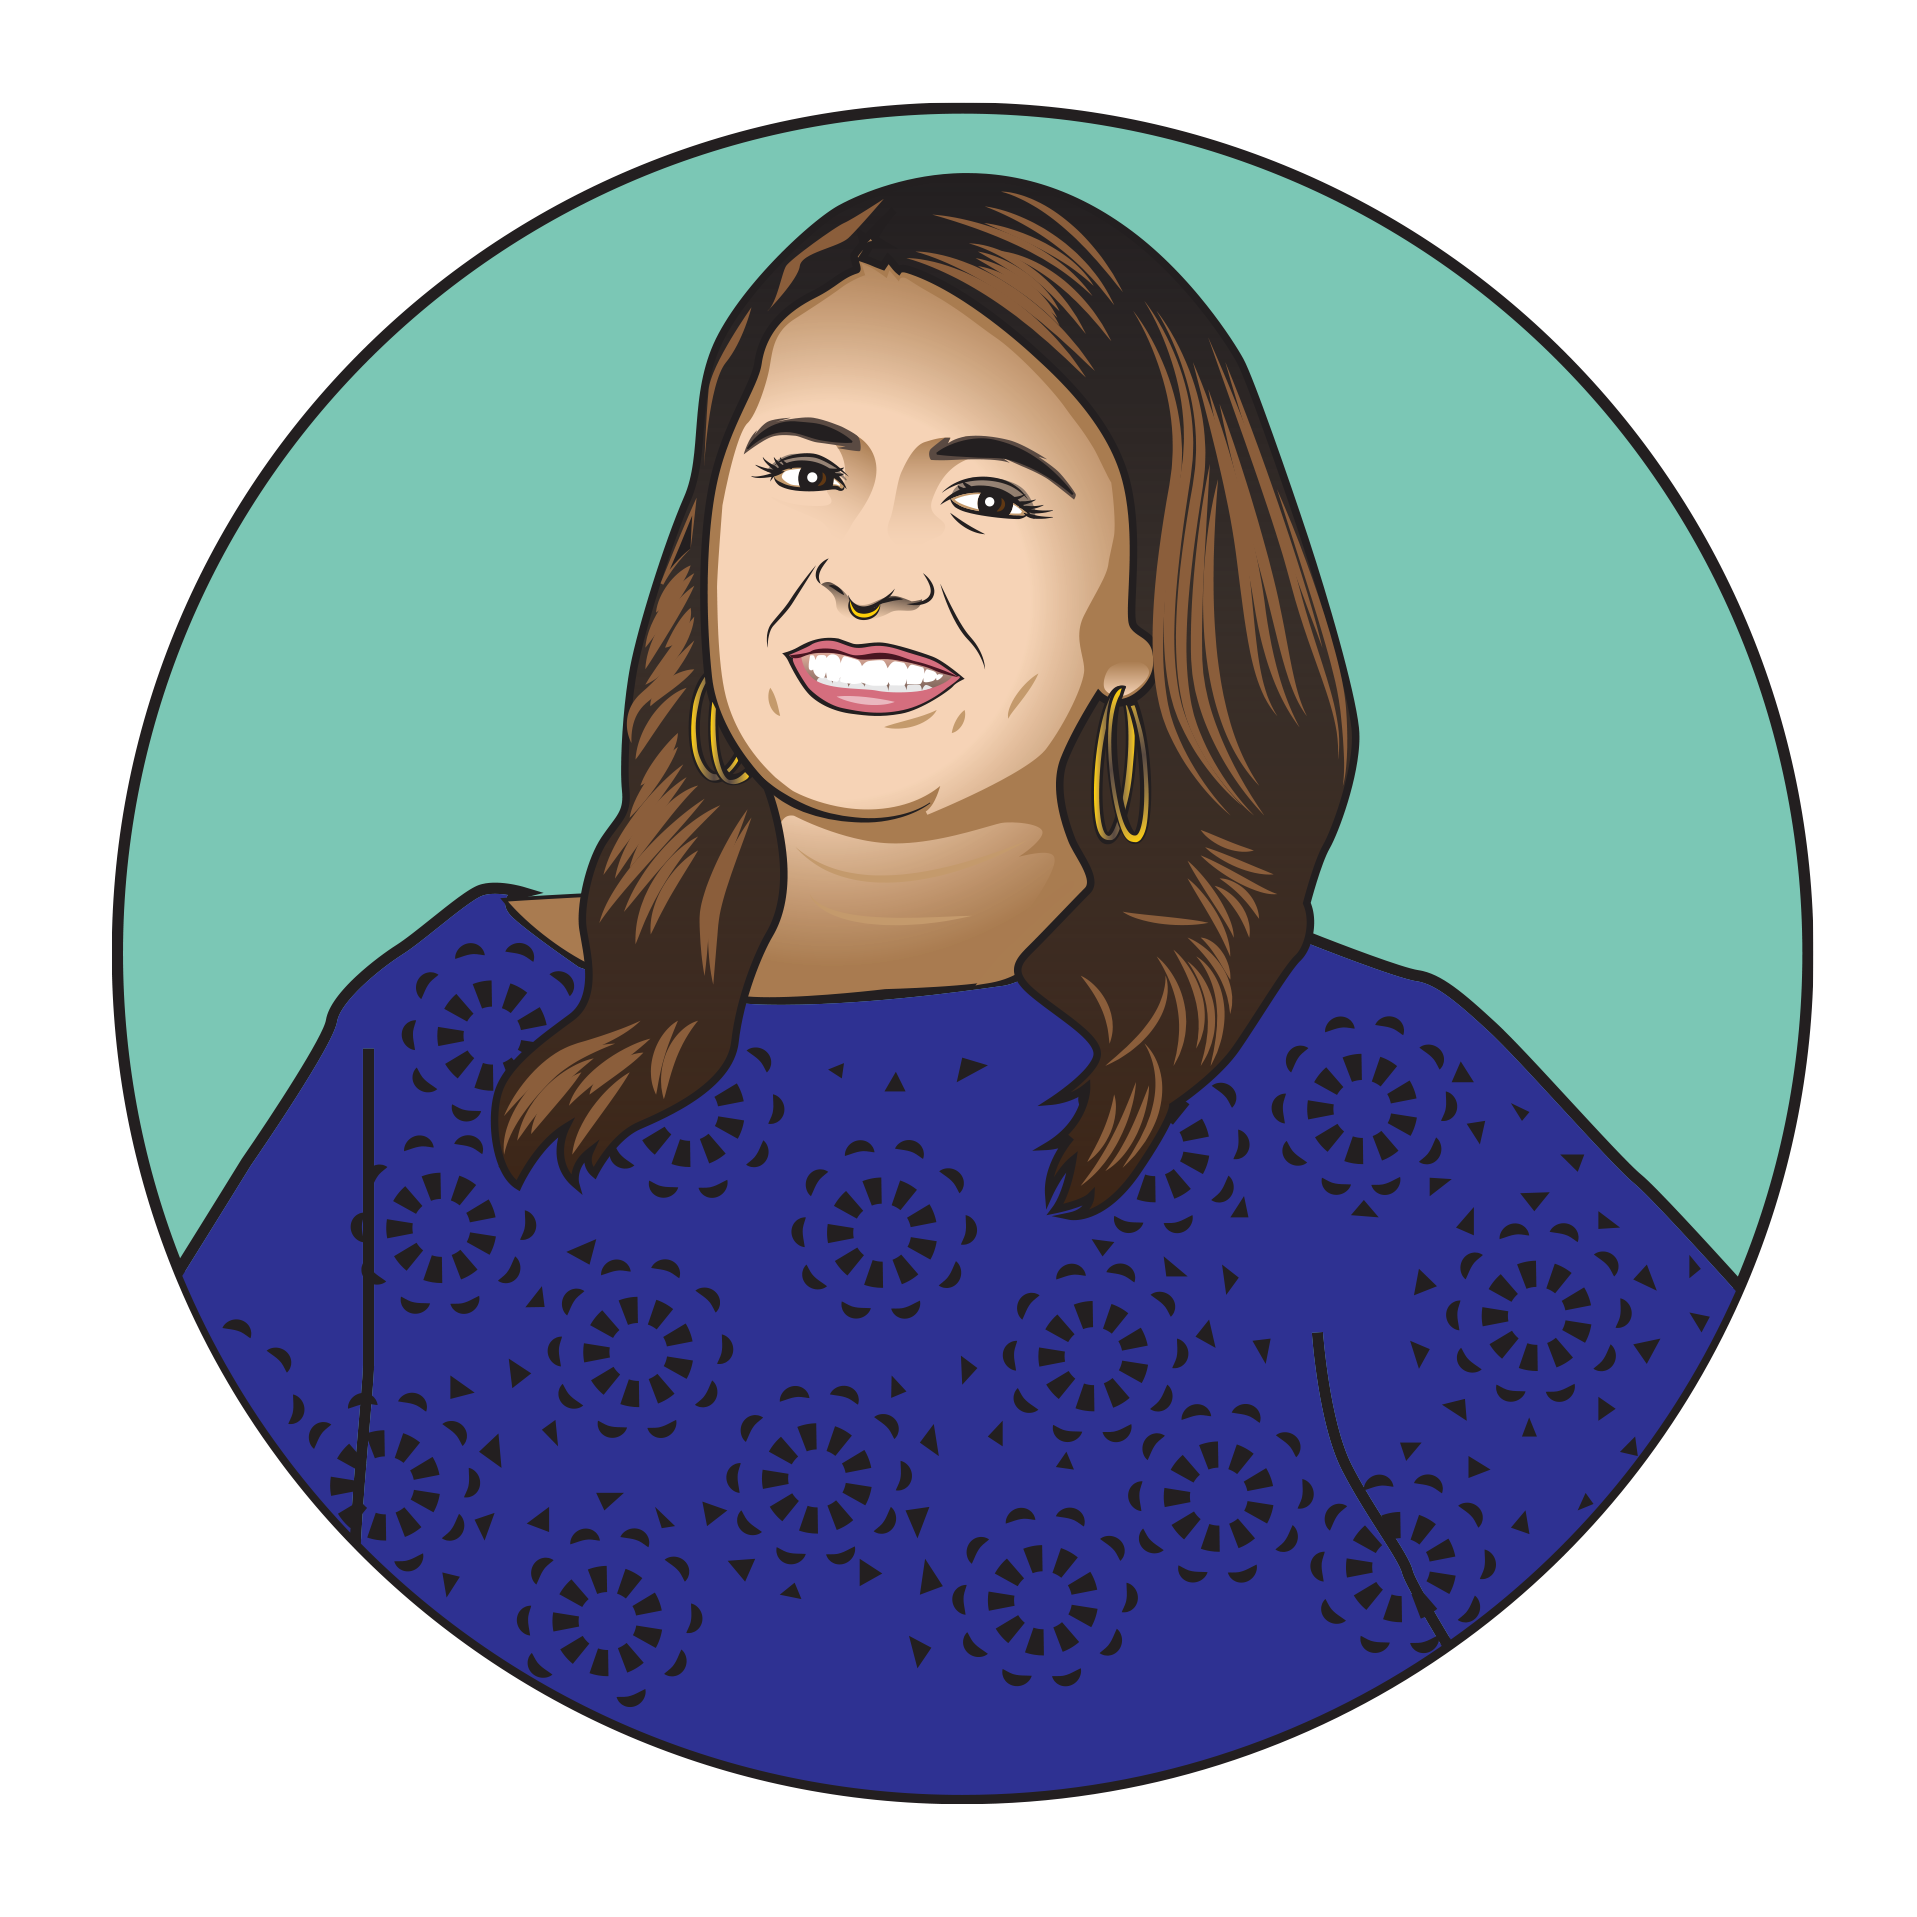 An illustrated image of Jennifer. She is wearing a blue shirt with a circular pattern and have brown hair. Her image is on a teal background.